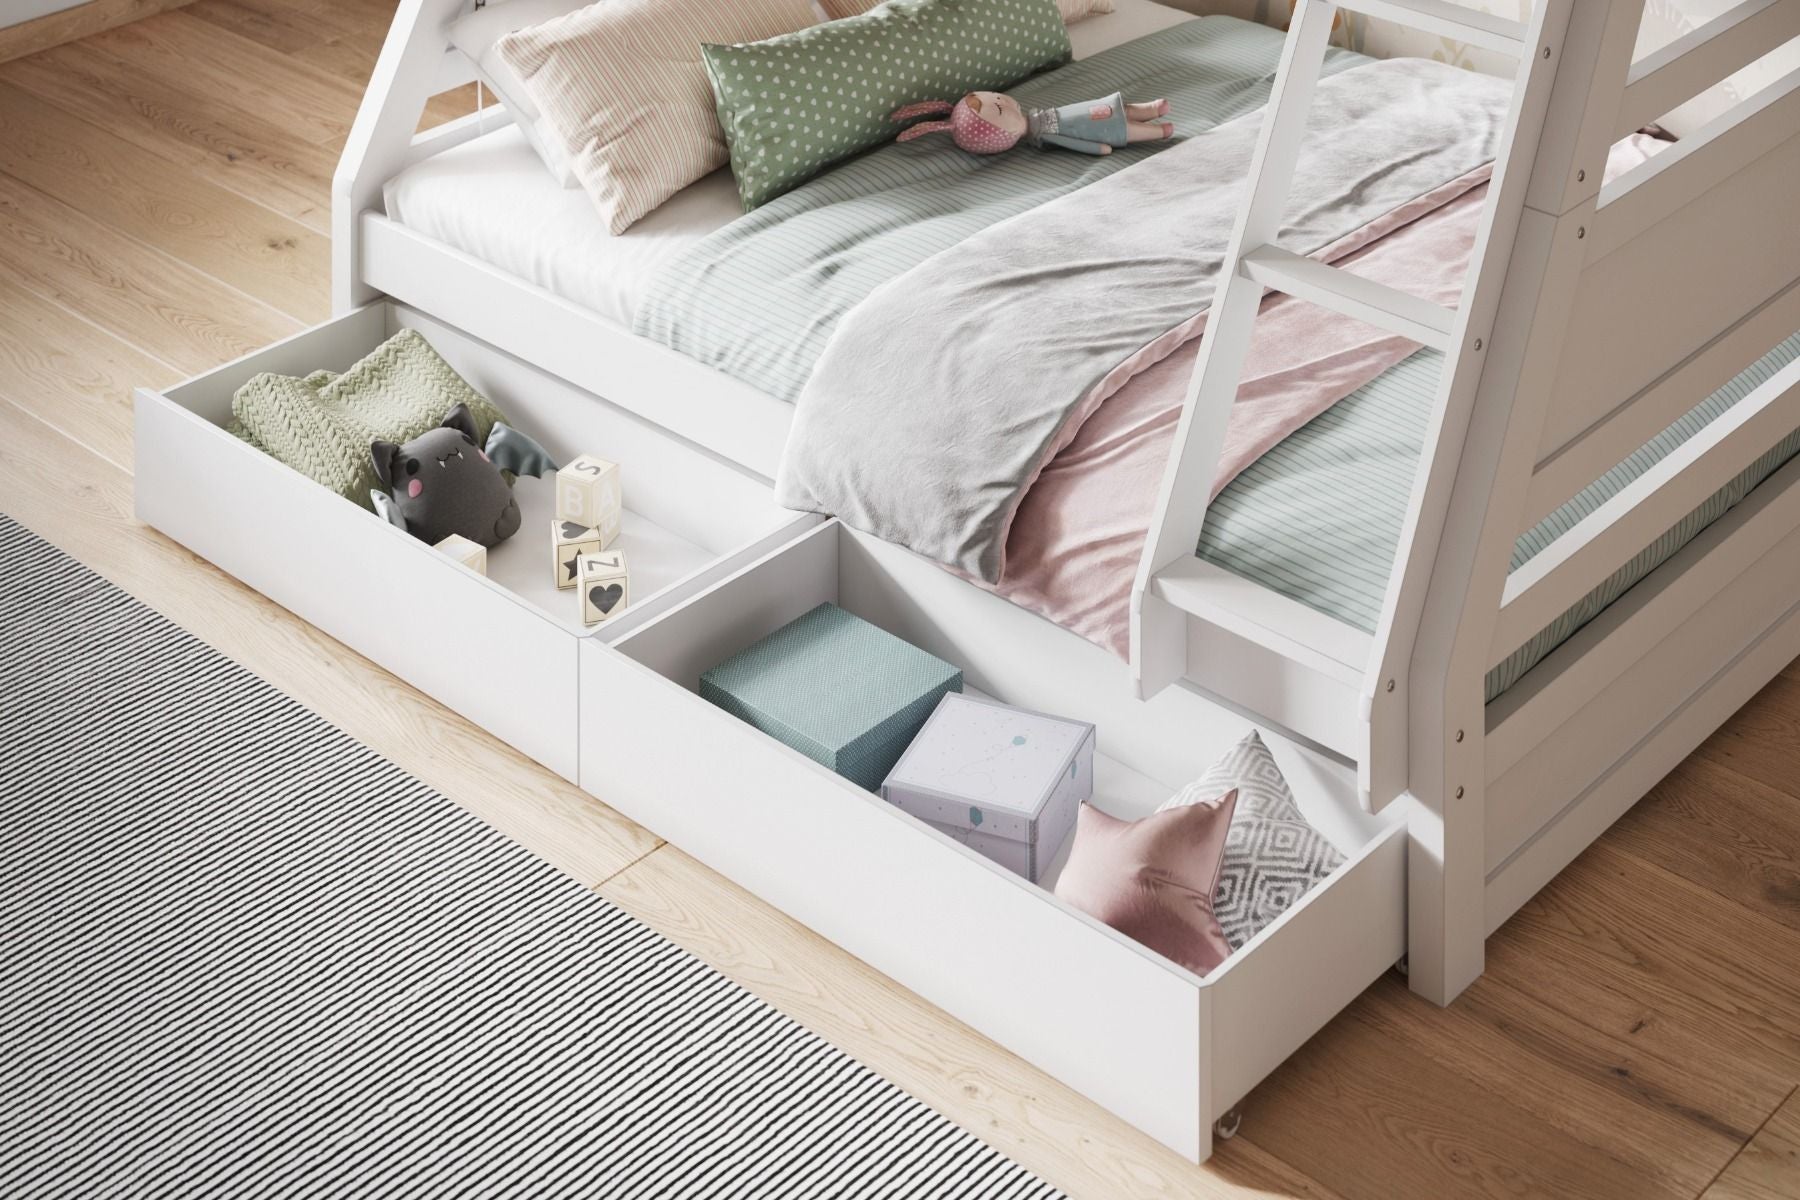 Flair Ollie Triple Bunk Bed with Storage Drawers - White